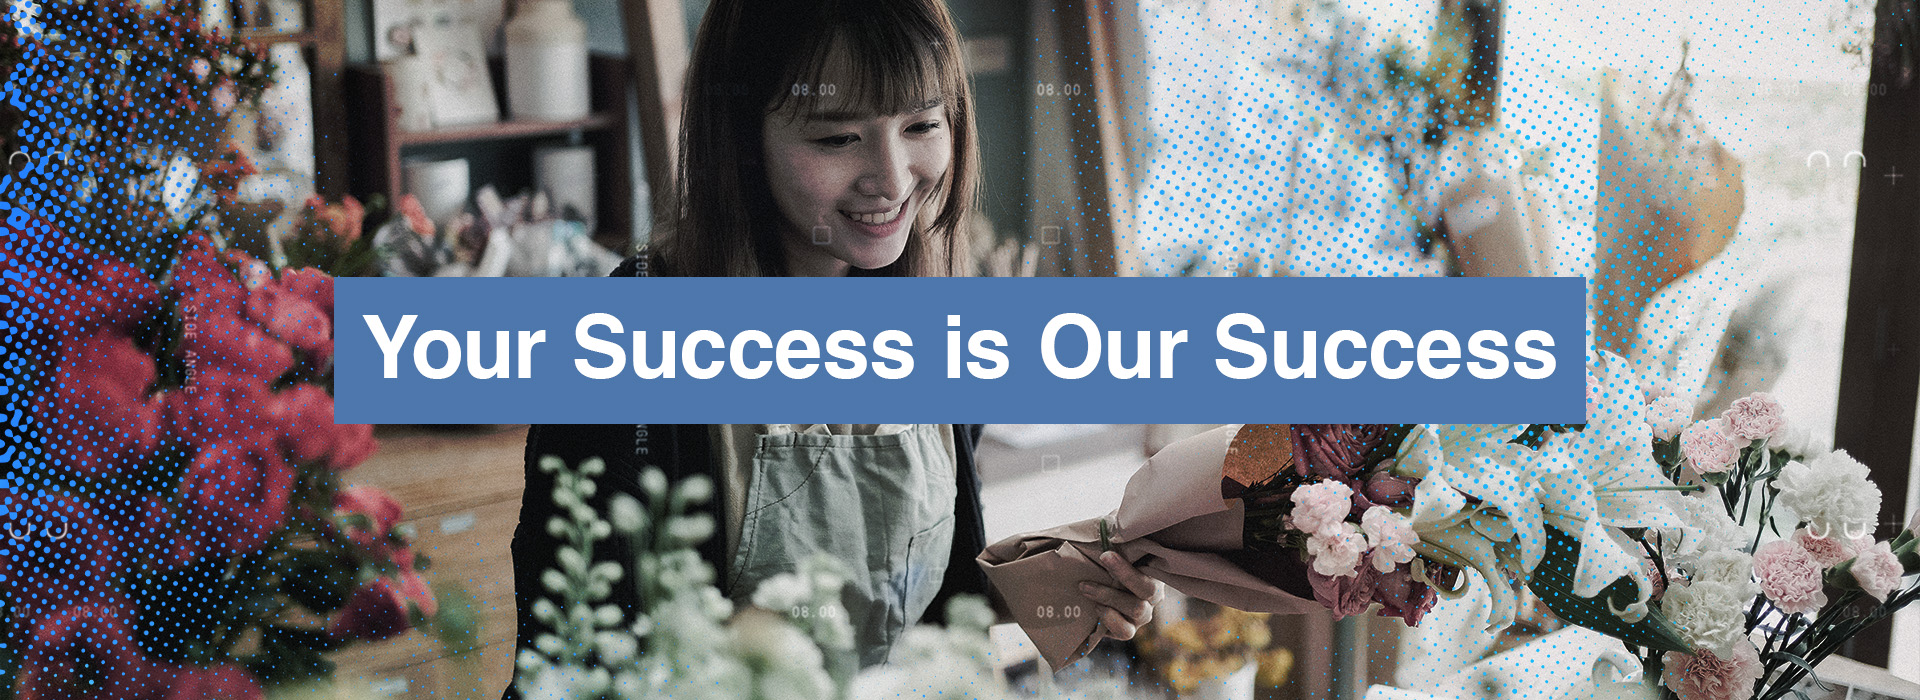 ST Digital Solutions: Your Success is Our Success